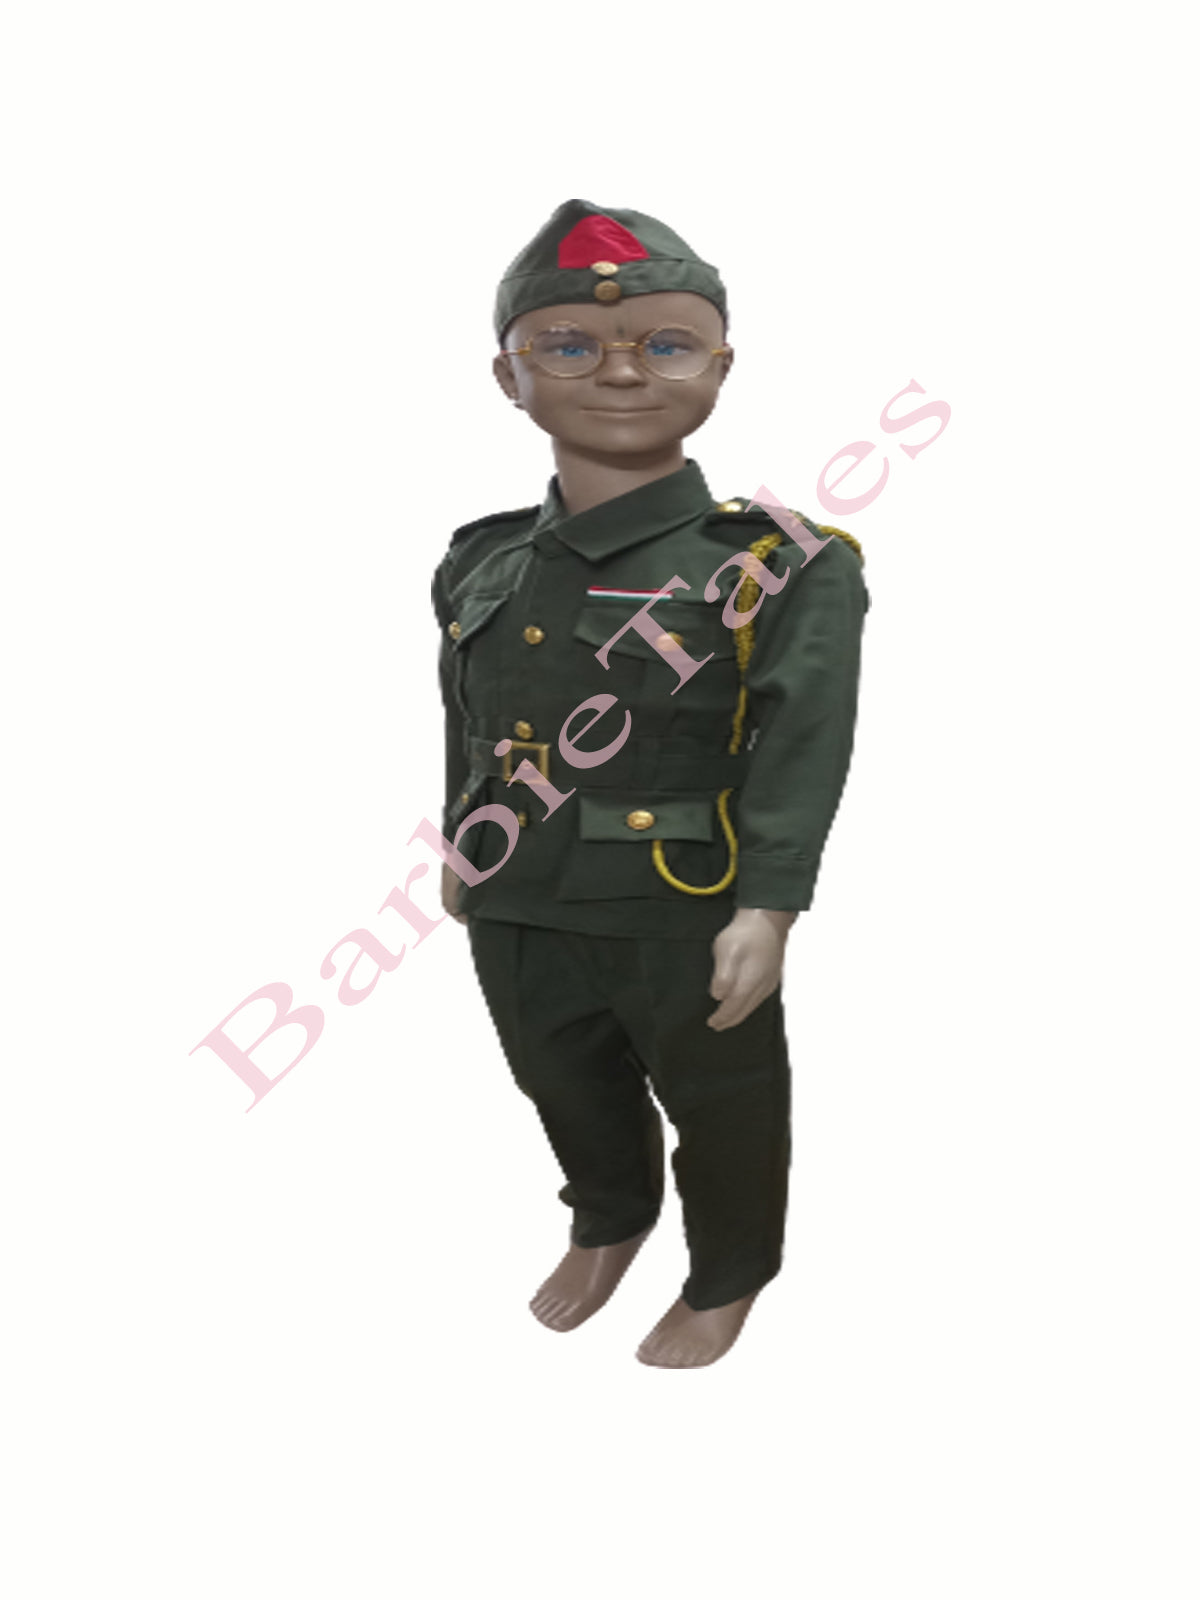 Subhash Chandra Bose Freedom Fighter Kids Fancy Dress Costume 11-13 Years  at Rs 407 | Children Costumes in Ghaziabad | ID: 2849771473597